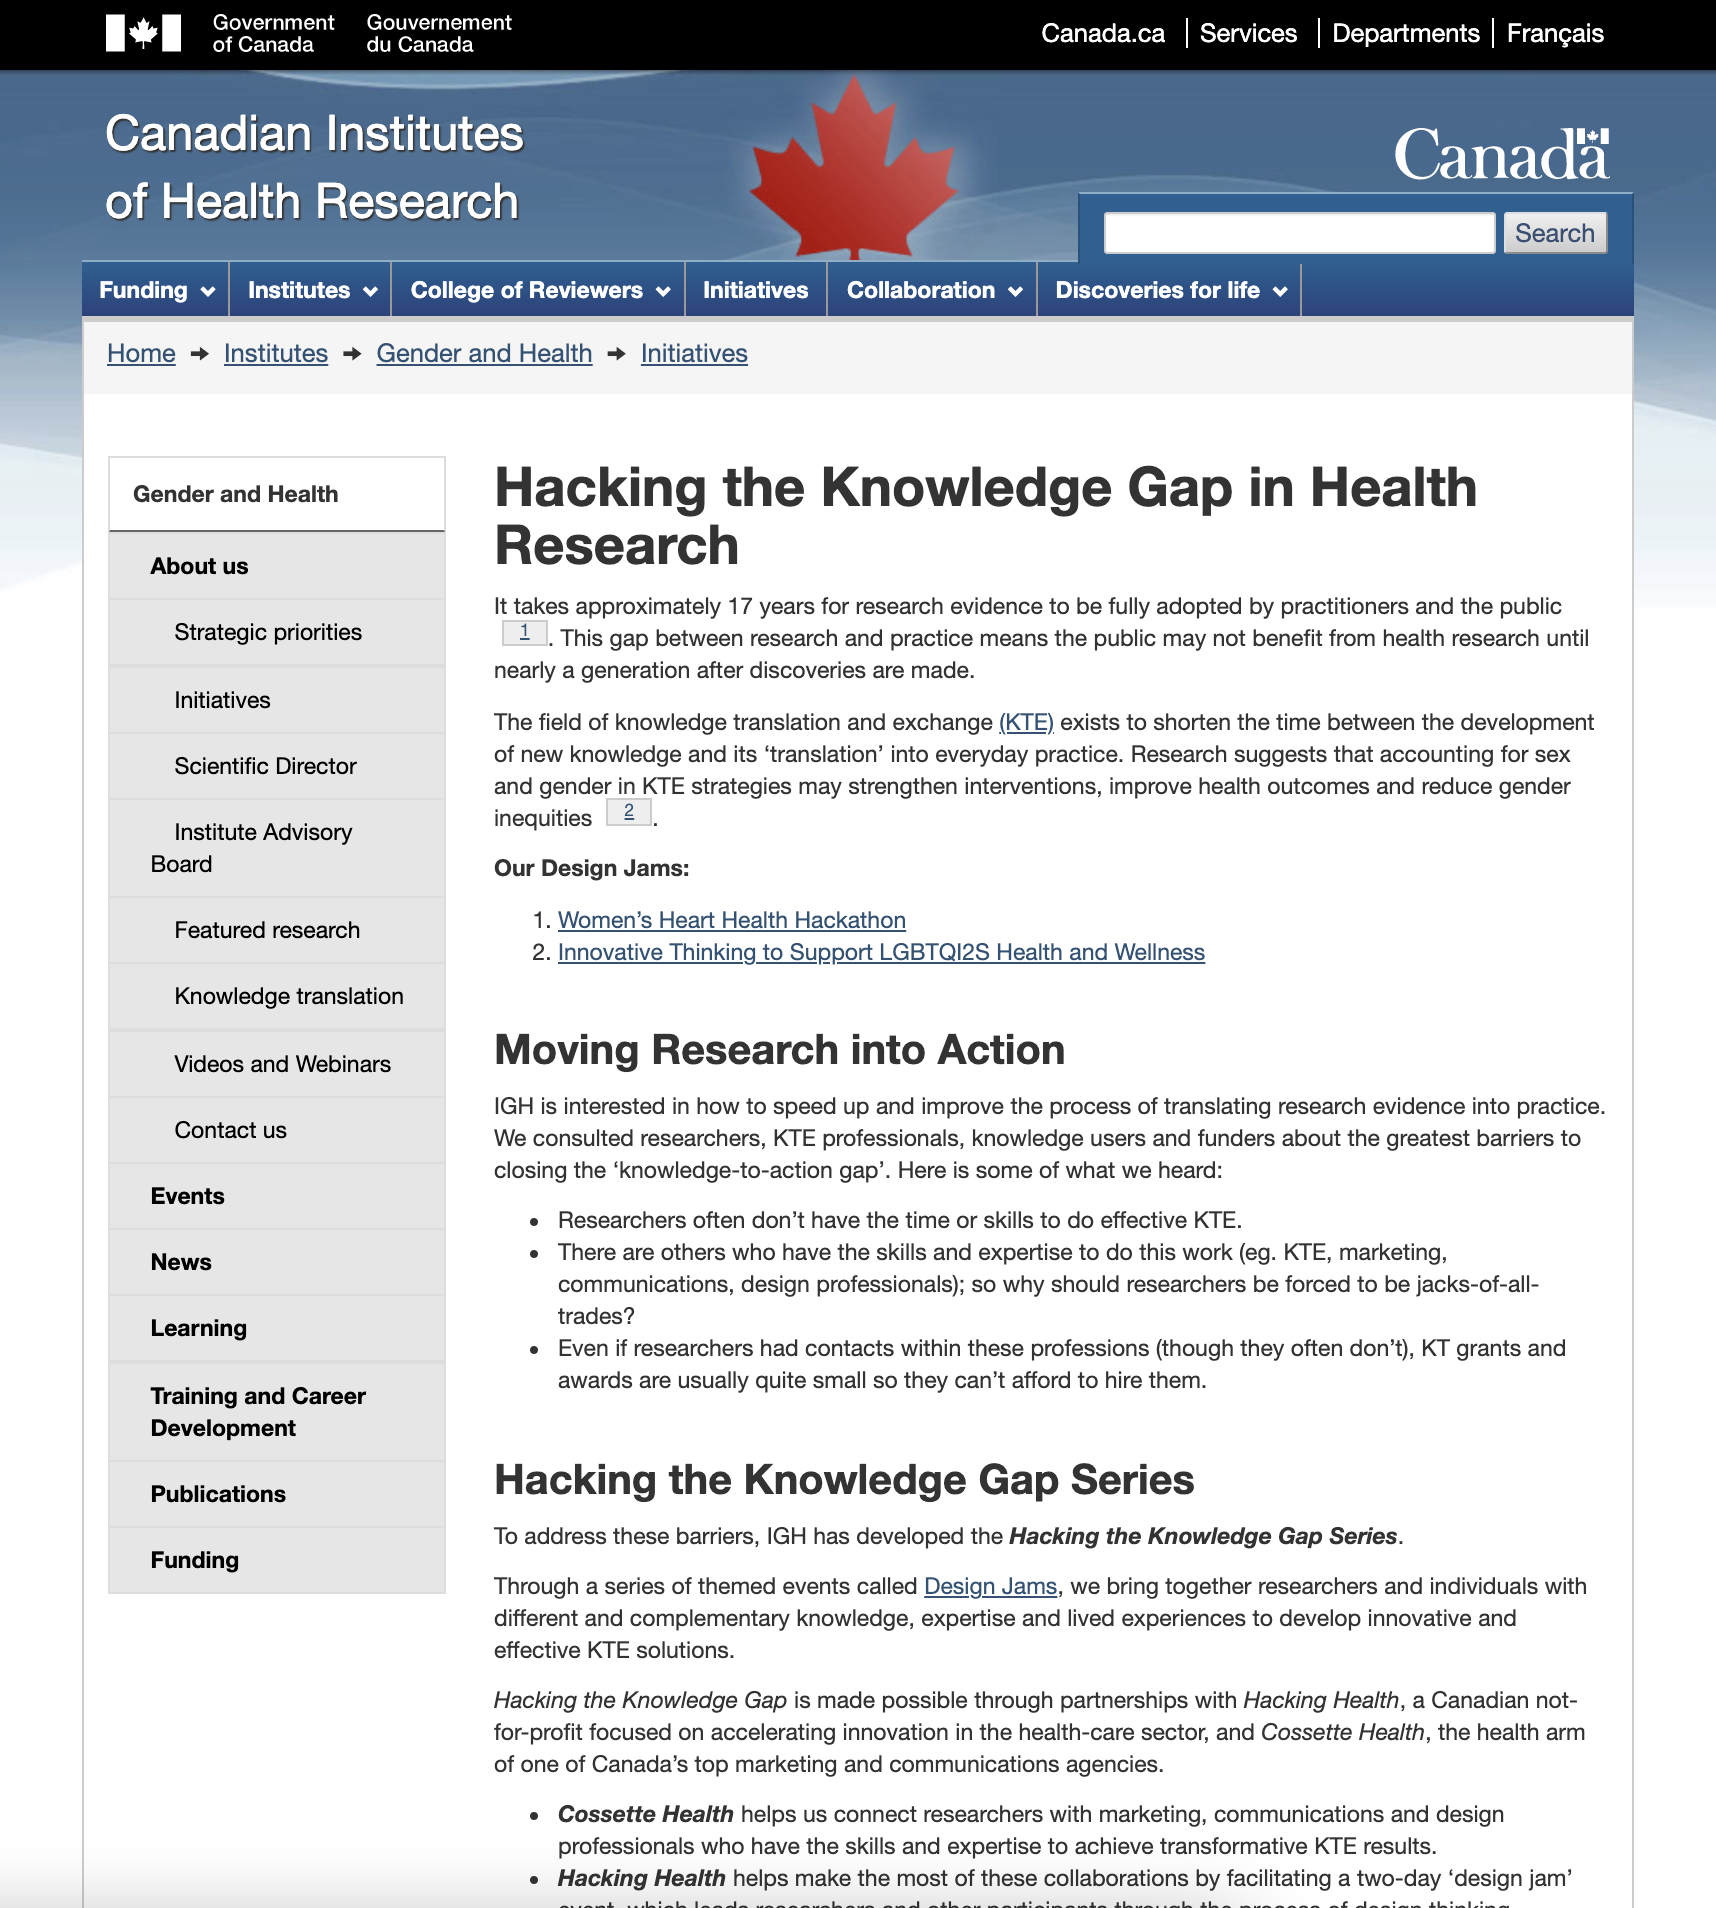 Hacking the Knowledge Gap in Health Research